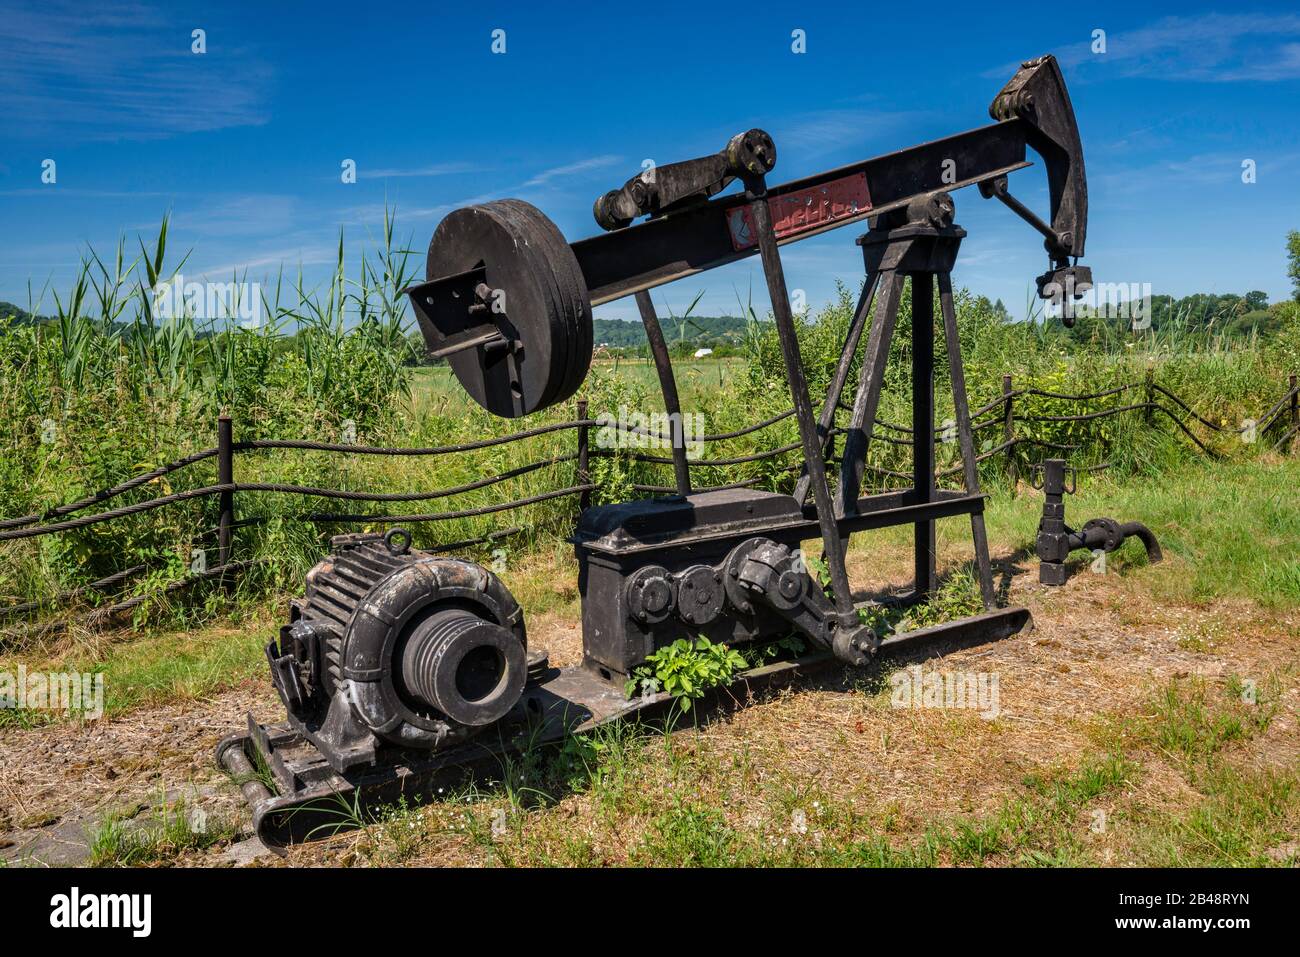 WULFEL-500 oil well pump jack, 1962, used in Subcarpathian wells, oil industry exhibition at Rural Architecture Museum in Sanok, Malopolska, Poland Stock Photo